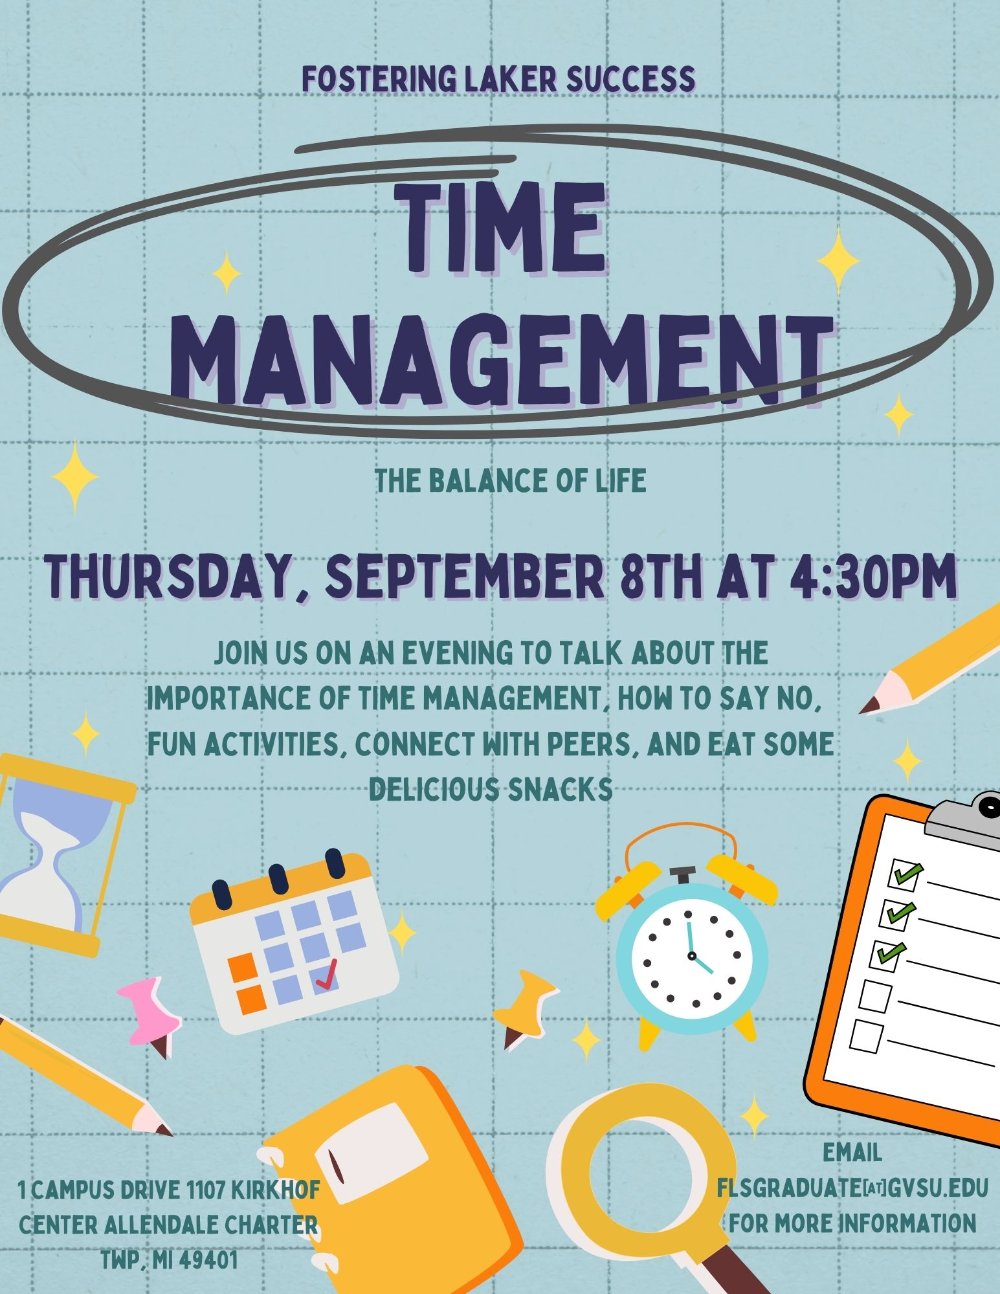 Time Management - The Balance of Life